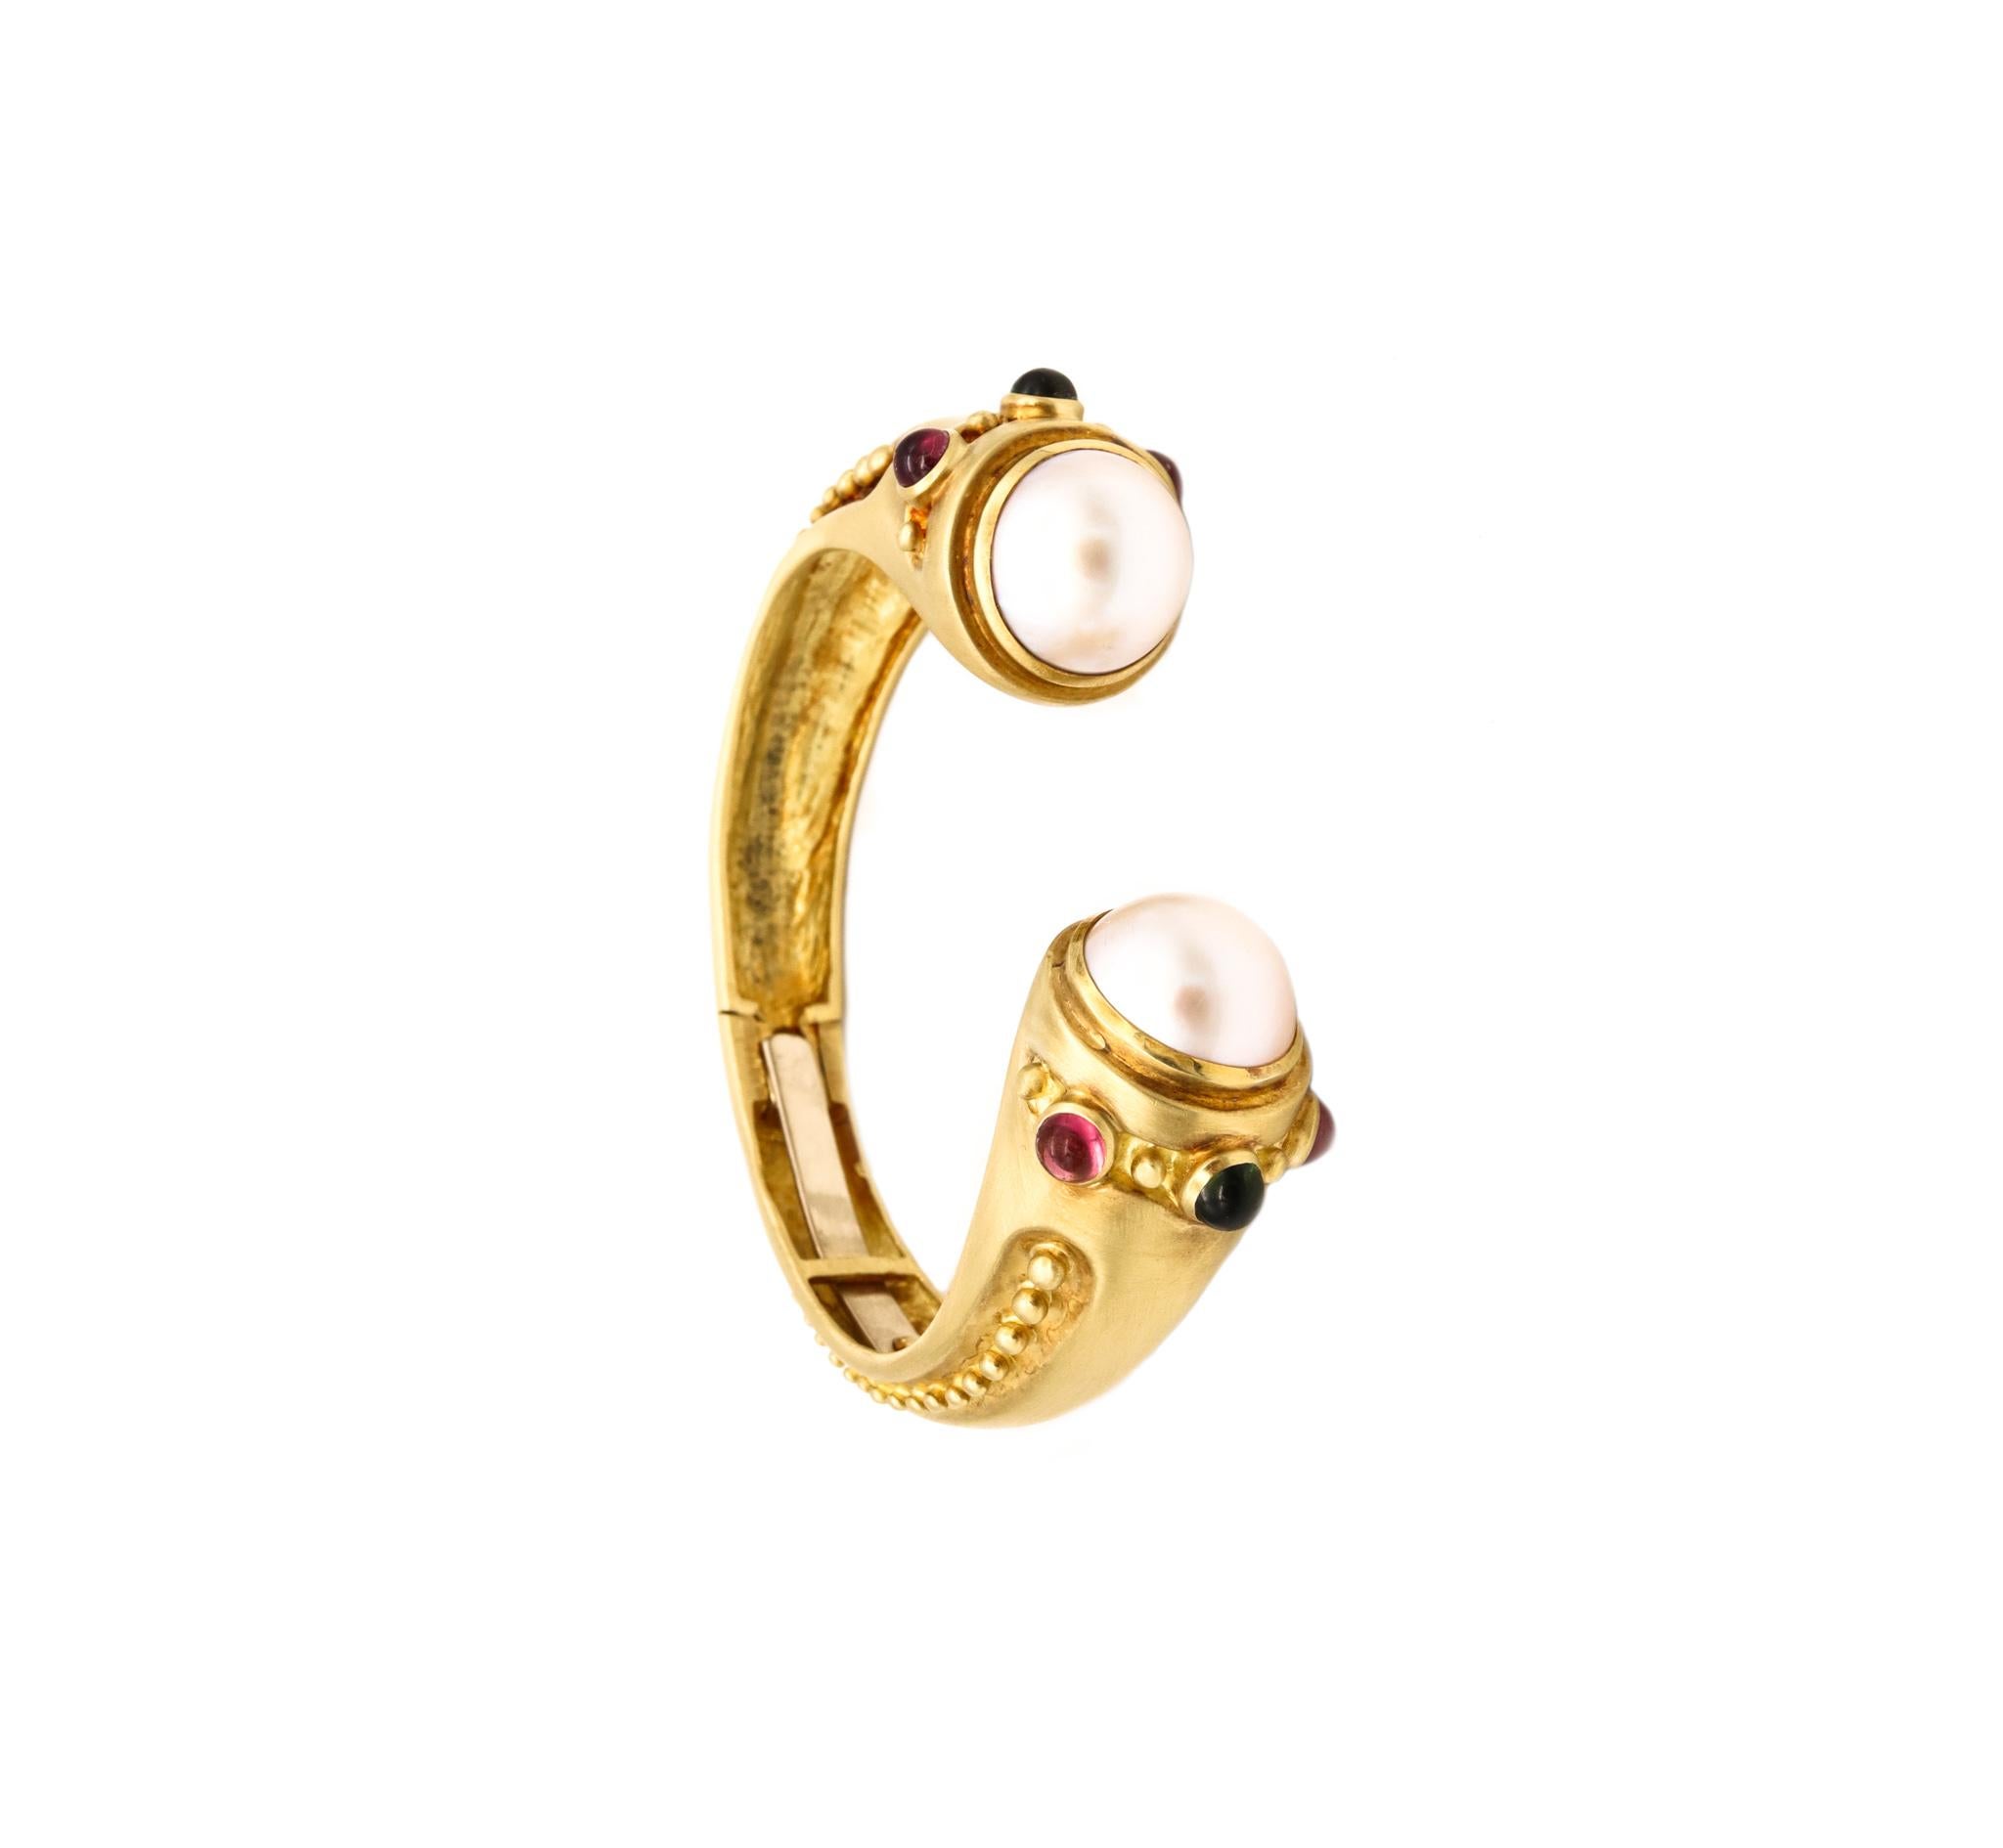 Women's Marlene Stowe Cuff Bracelet in 18Kt Brushed Gold with Mabe Pearls and Tourmaline For Sale